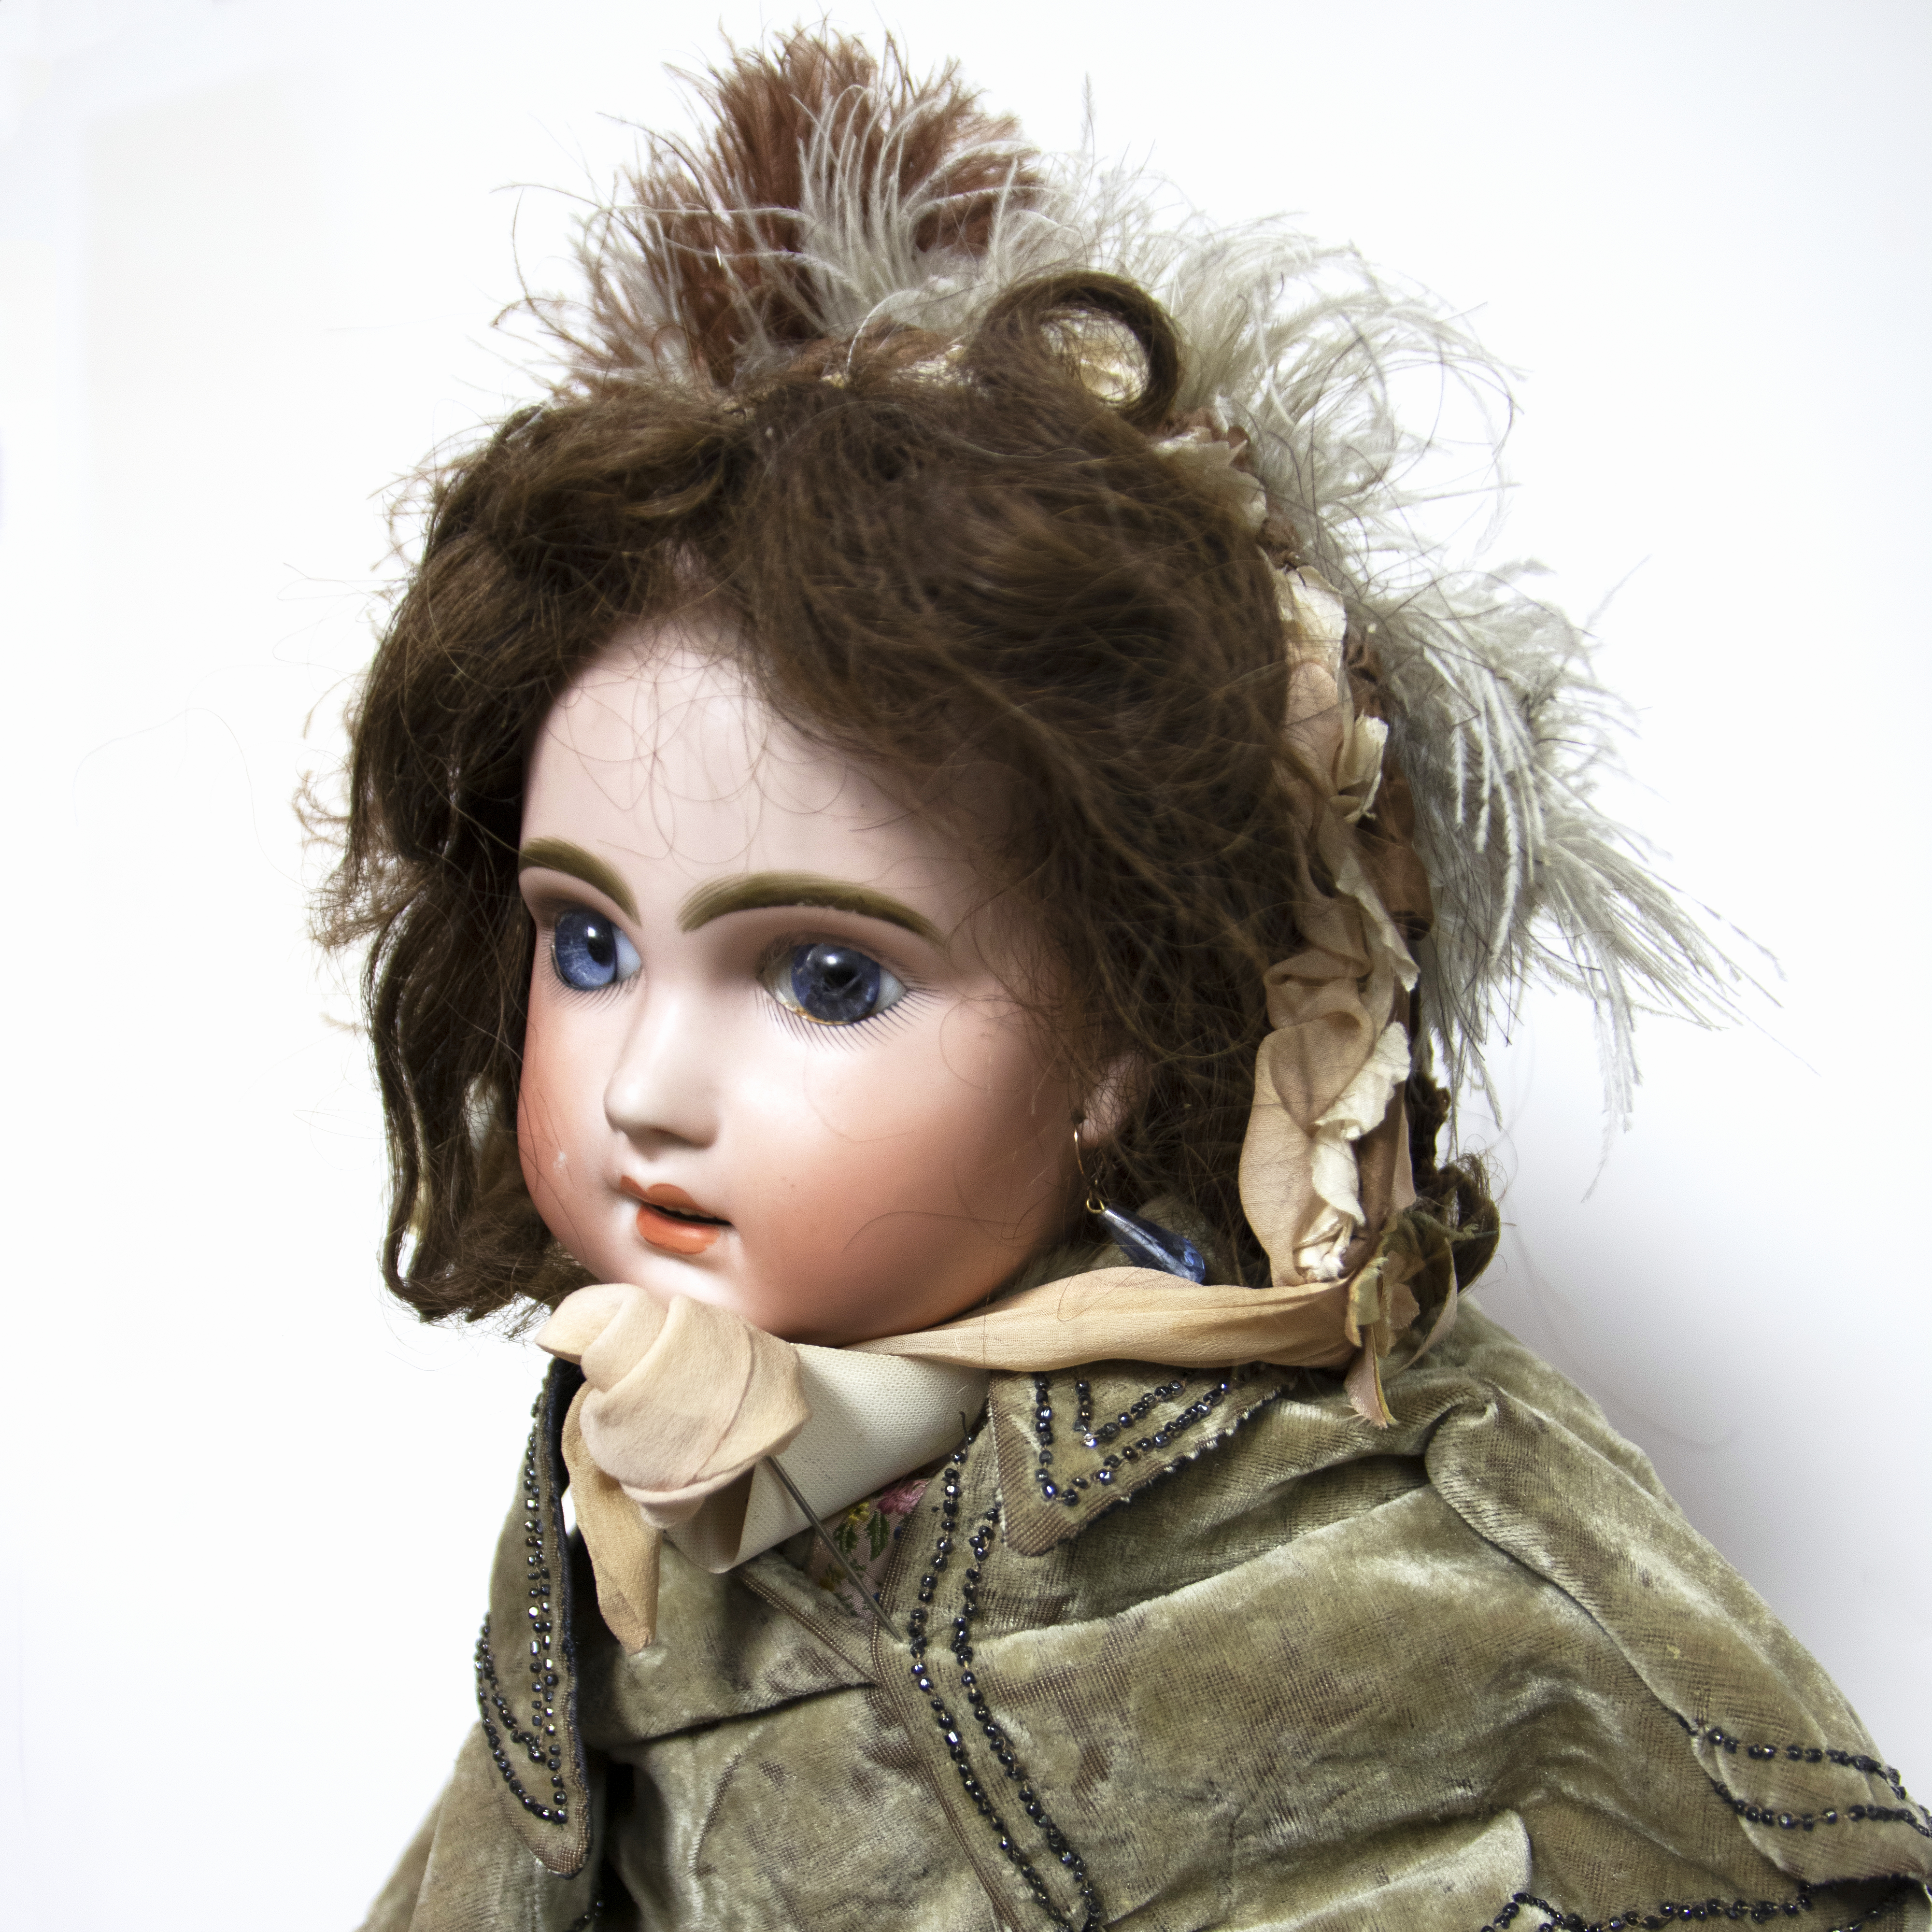 A TETE JUMEAU DOLL, WITH RED "TETE